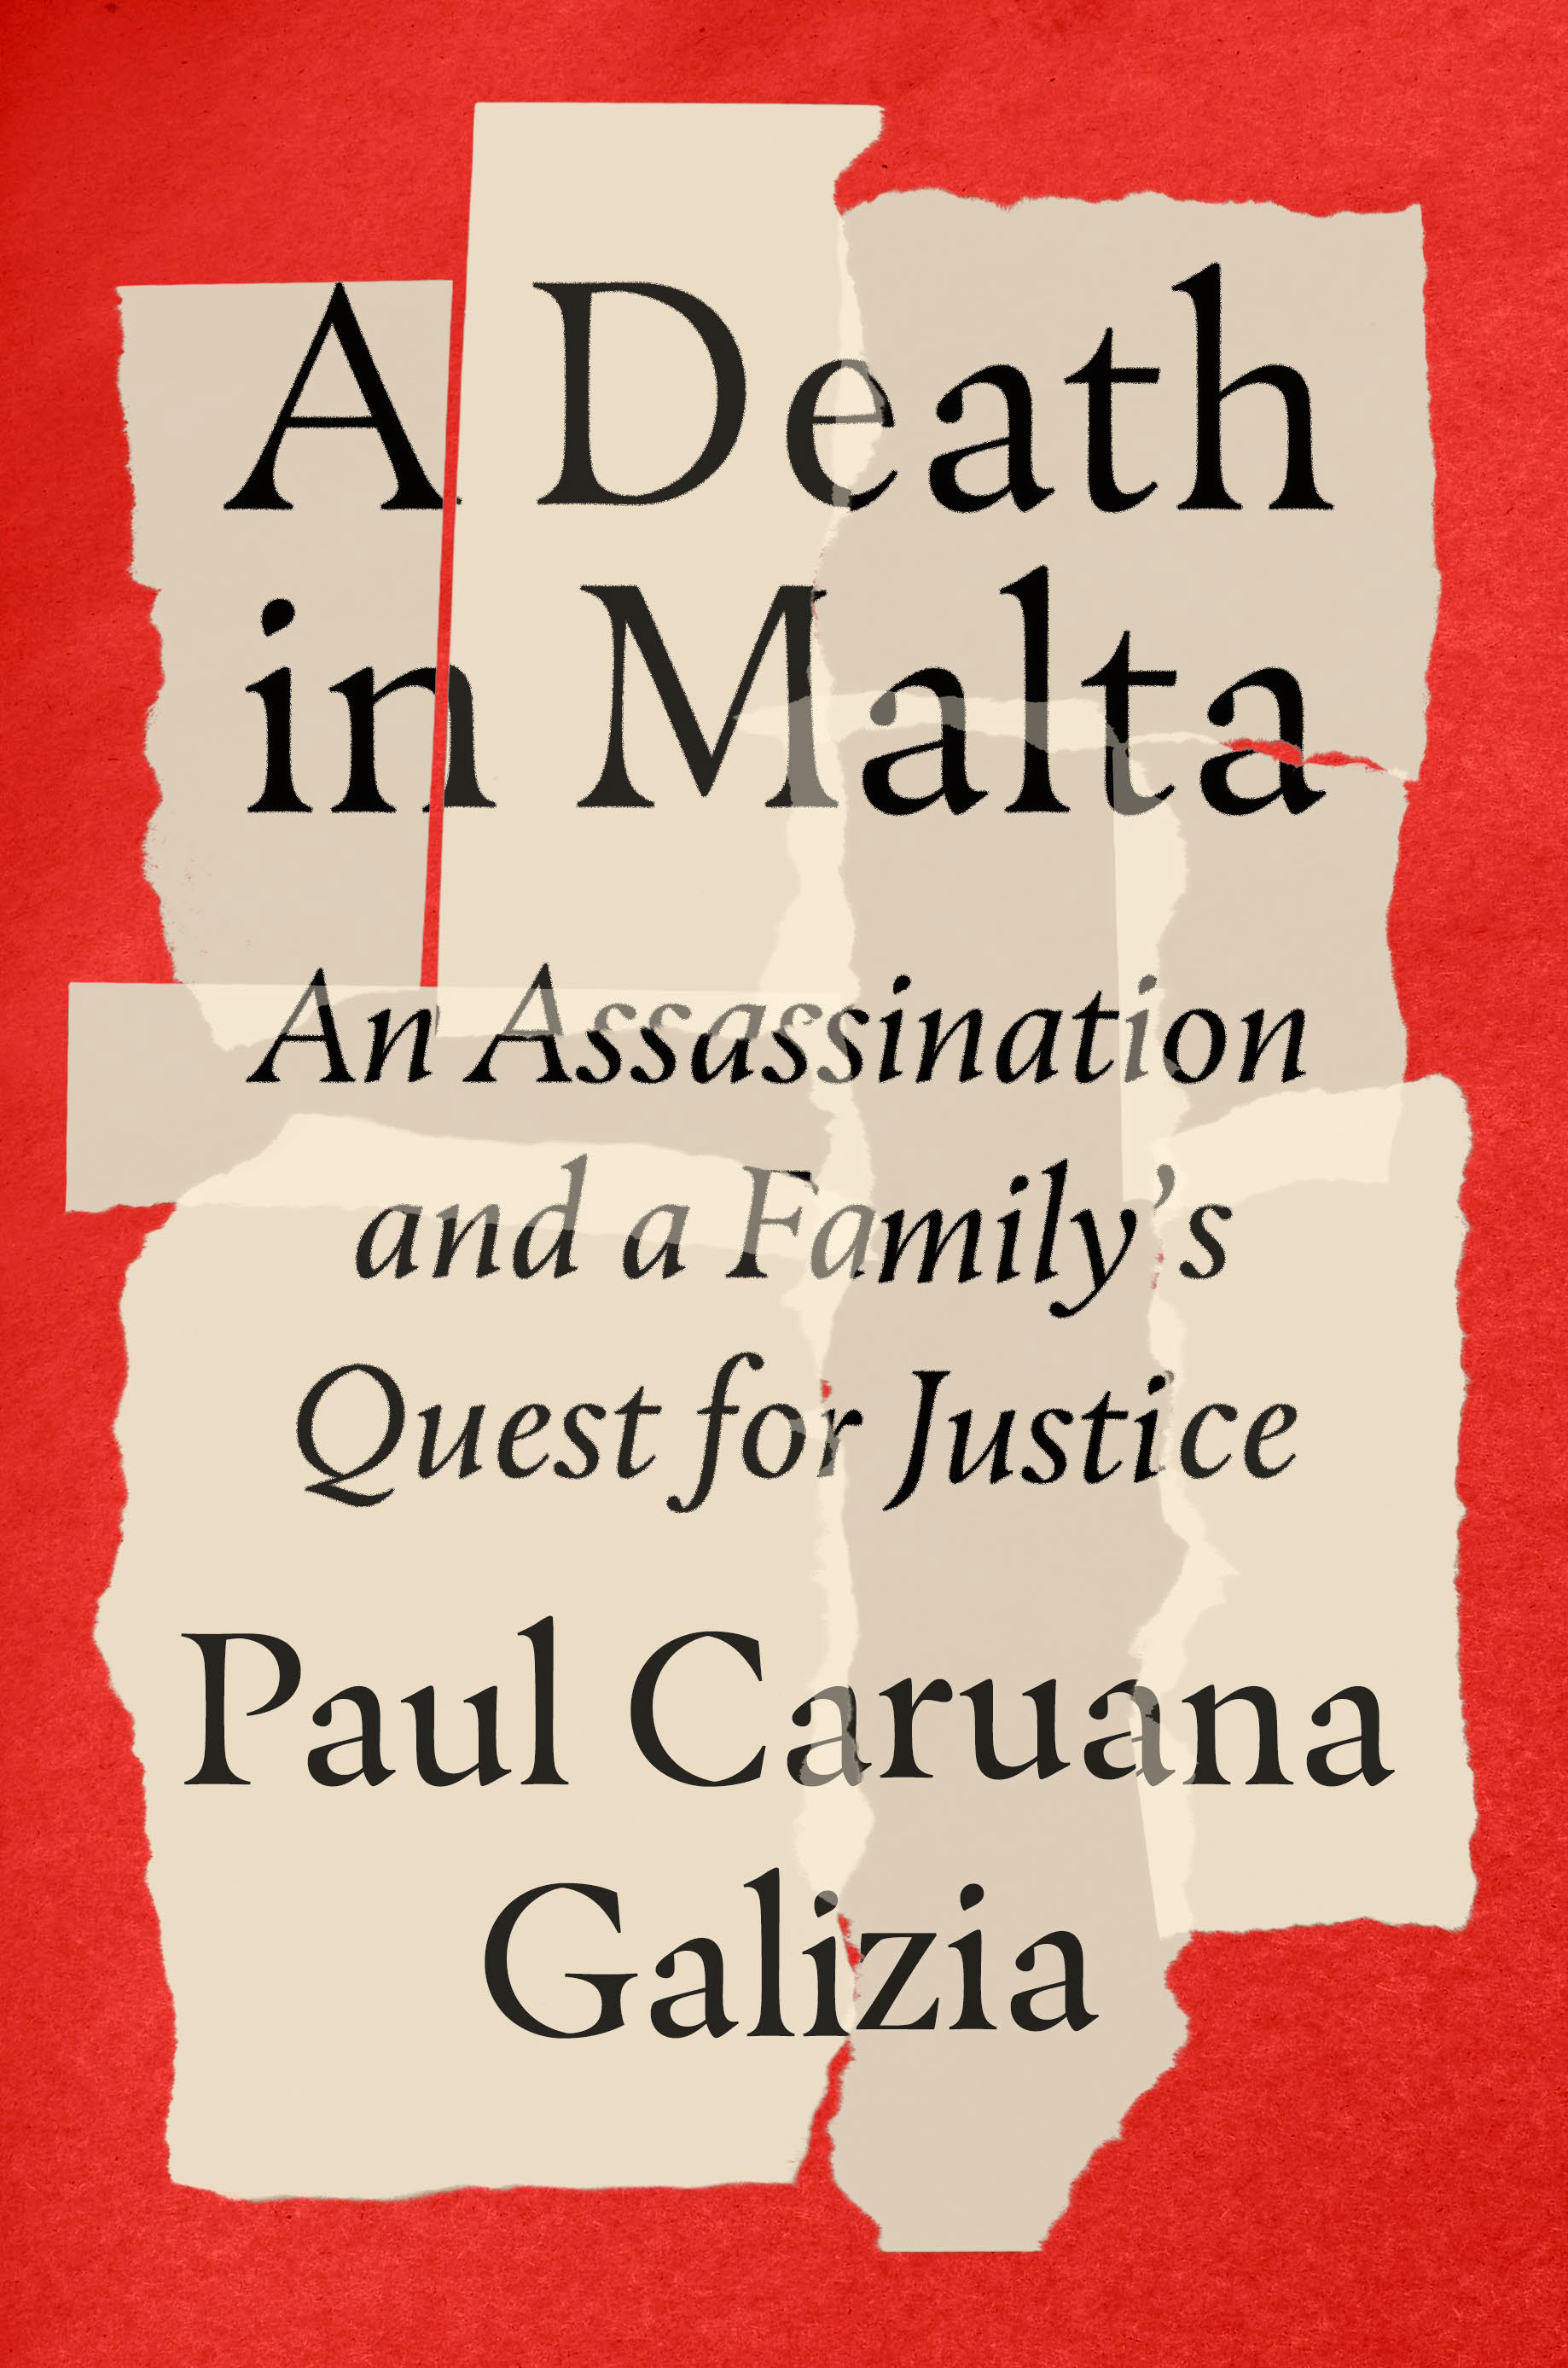 A Death in Malta : An Assassination and a Family's Quest for Justice | Caruana Galizia, Paul (Auteur)